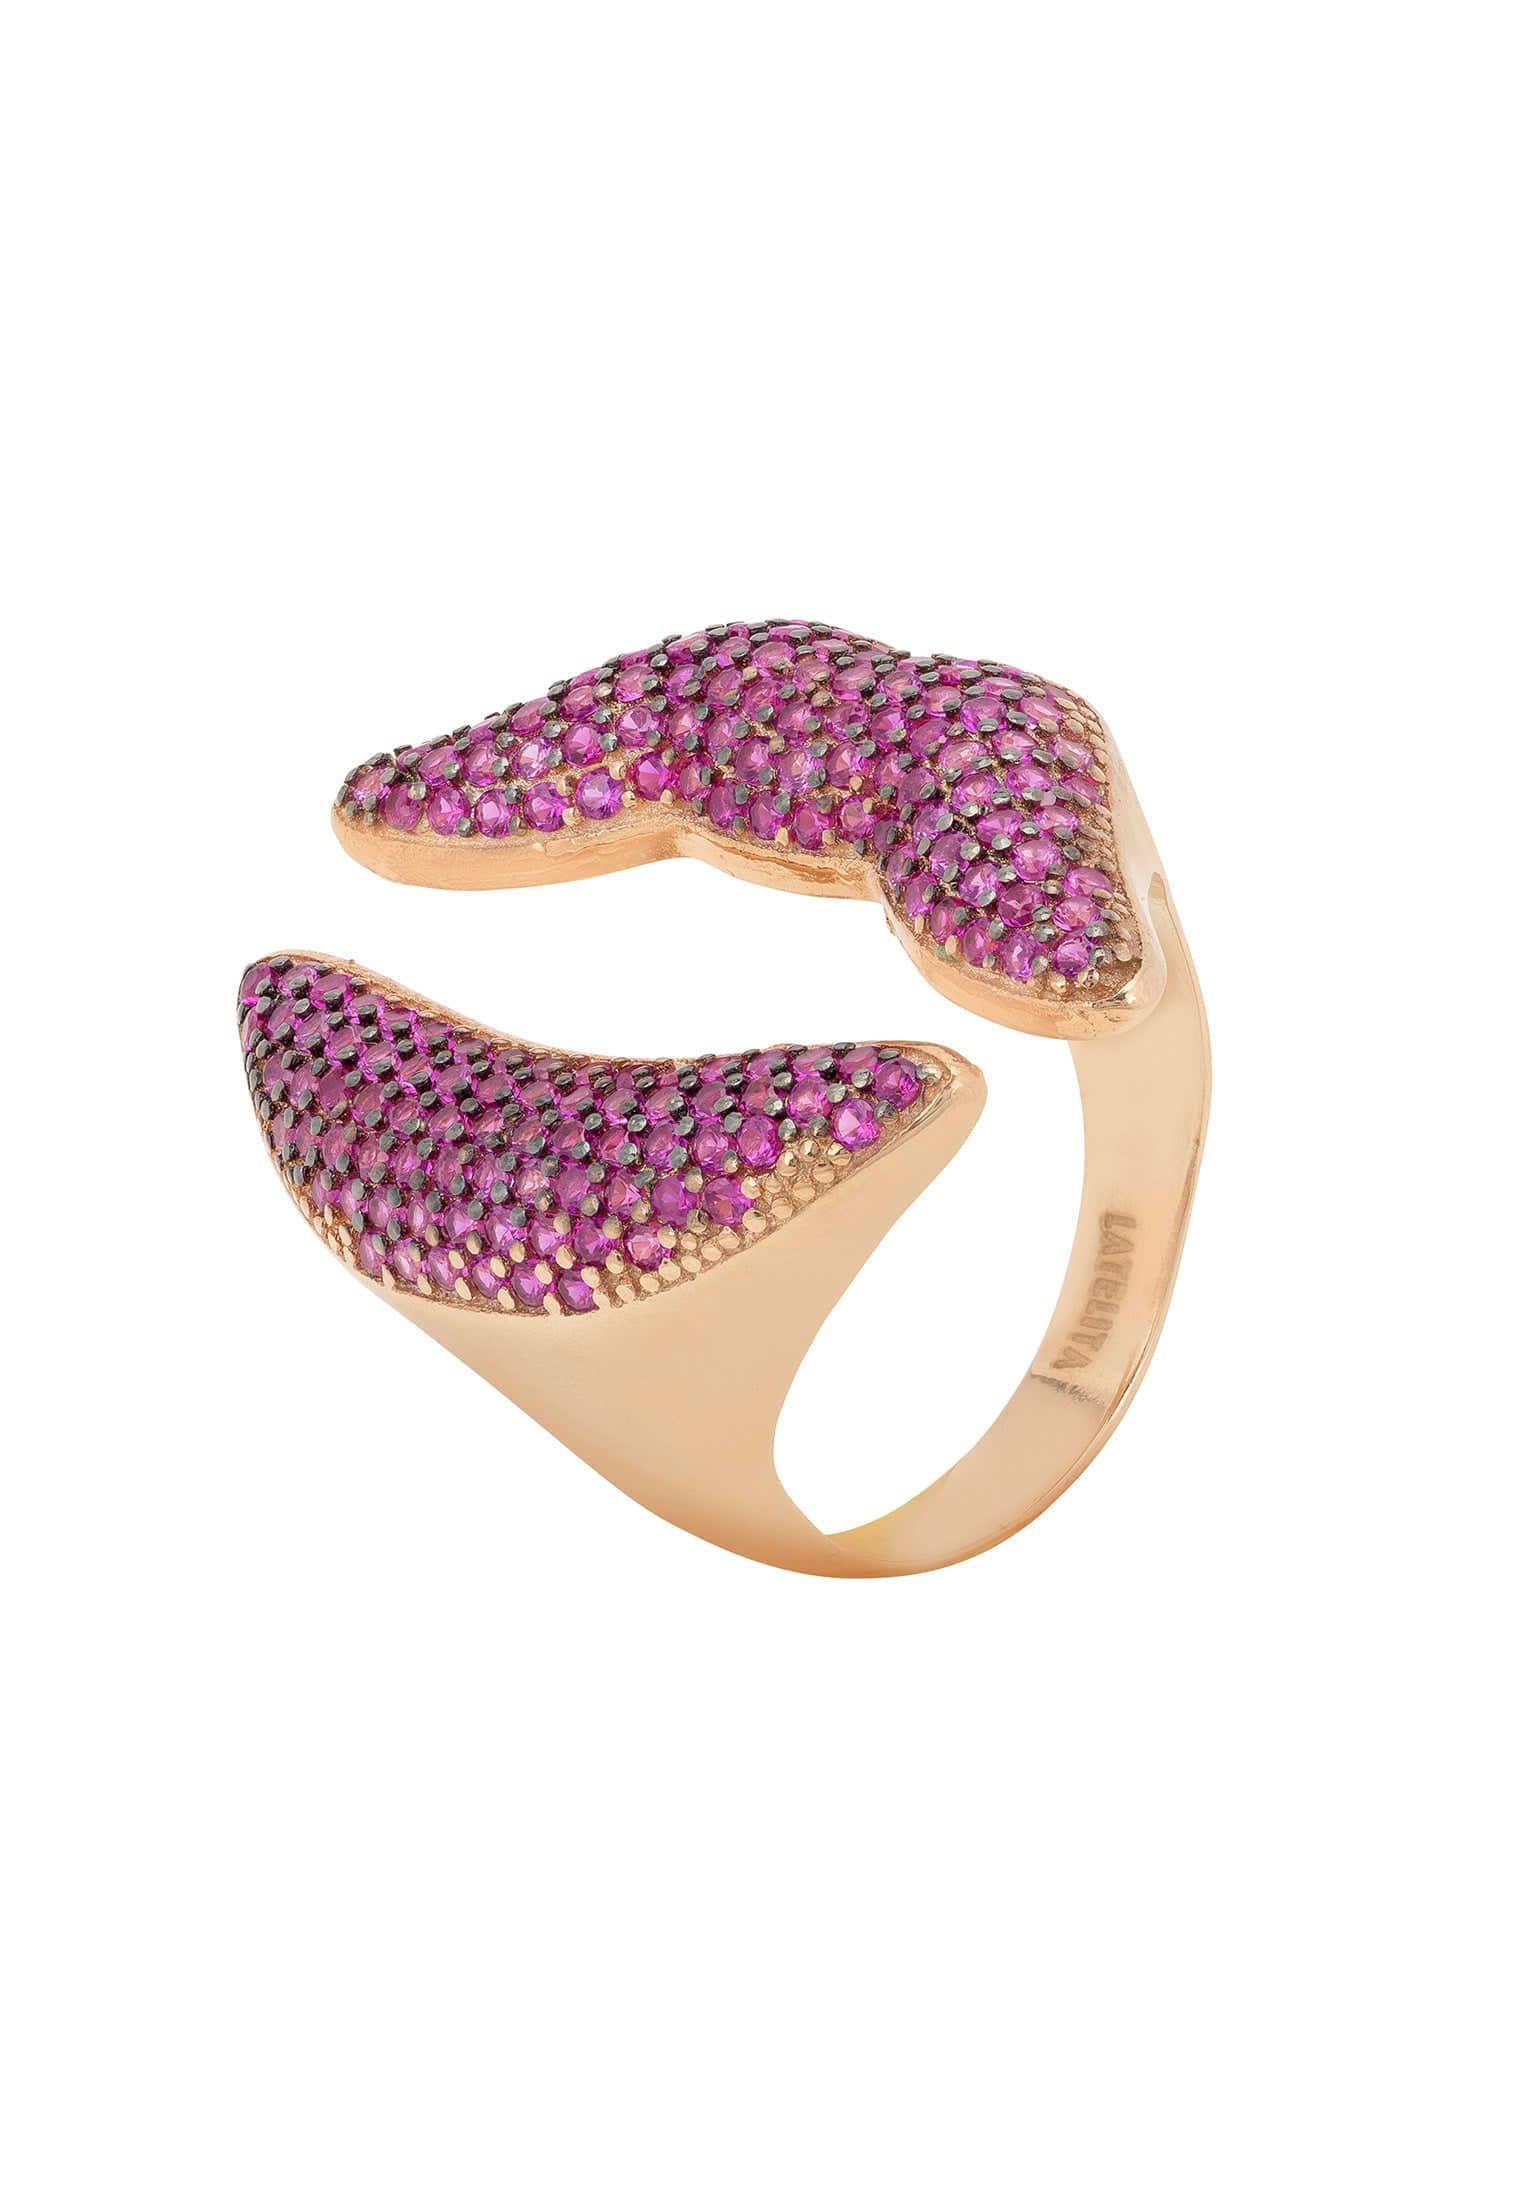 Rosegold Lips Ring with Pink-Red Cubic Zirconia - Playful Statement Piece for Everyday Styling and Gifts - Jewelry & Watches - Bijou Her -  -  - 